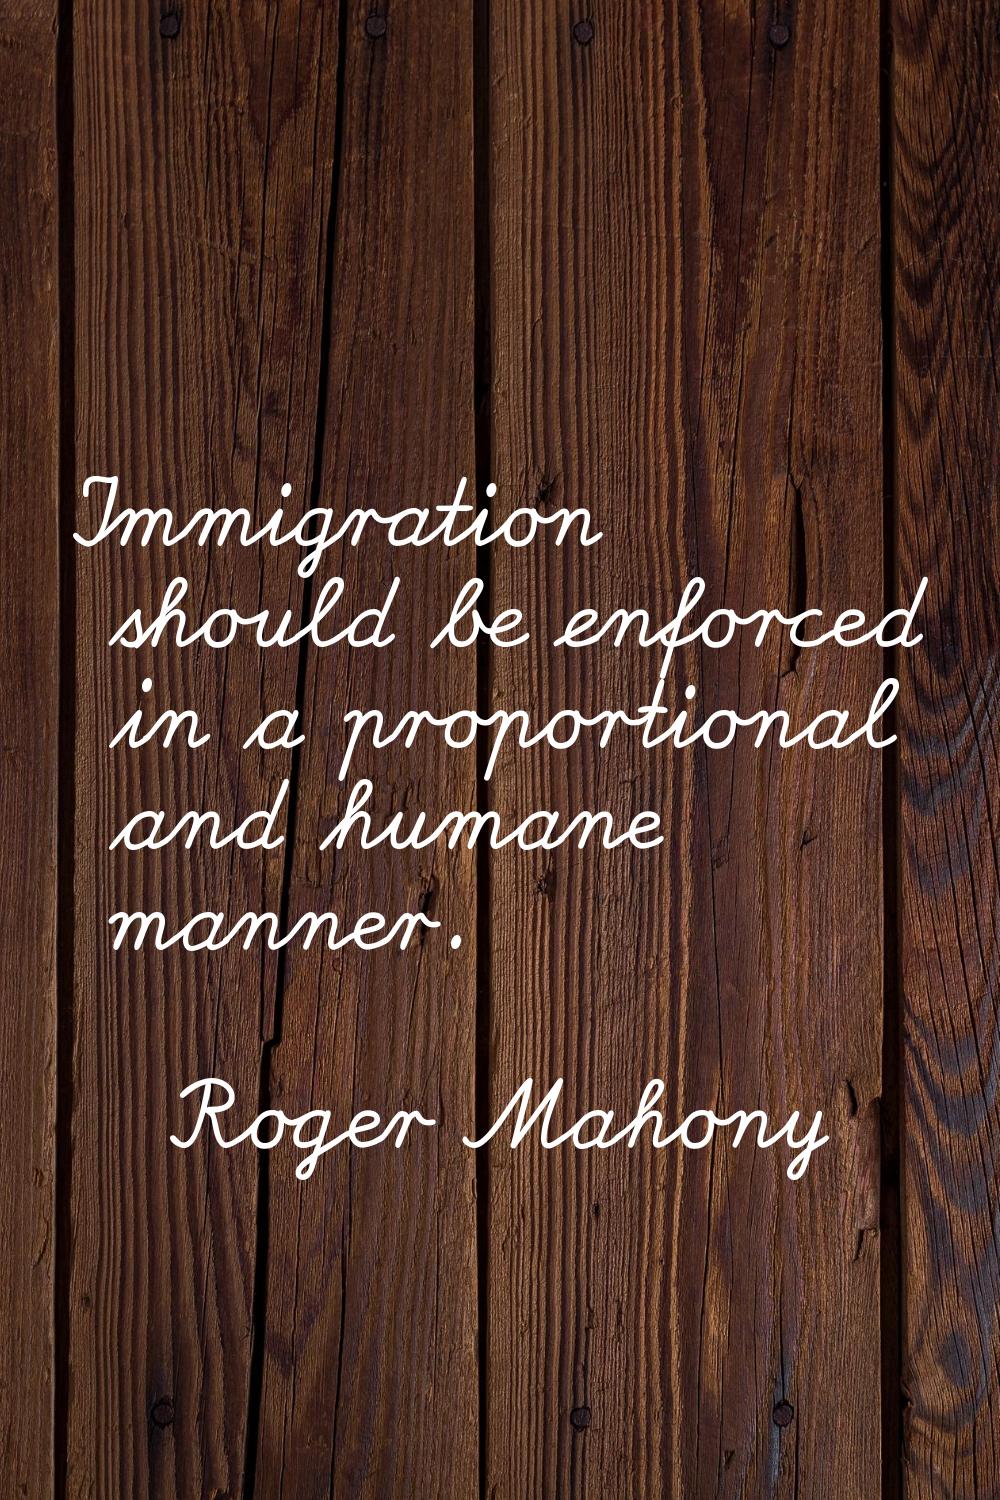 Immigration should be enforced in a proportional and humane manner.